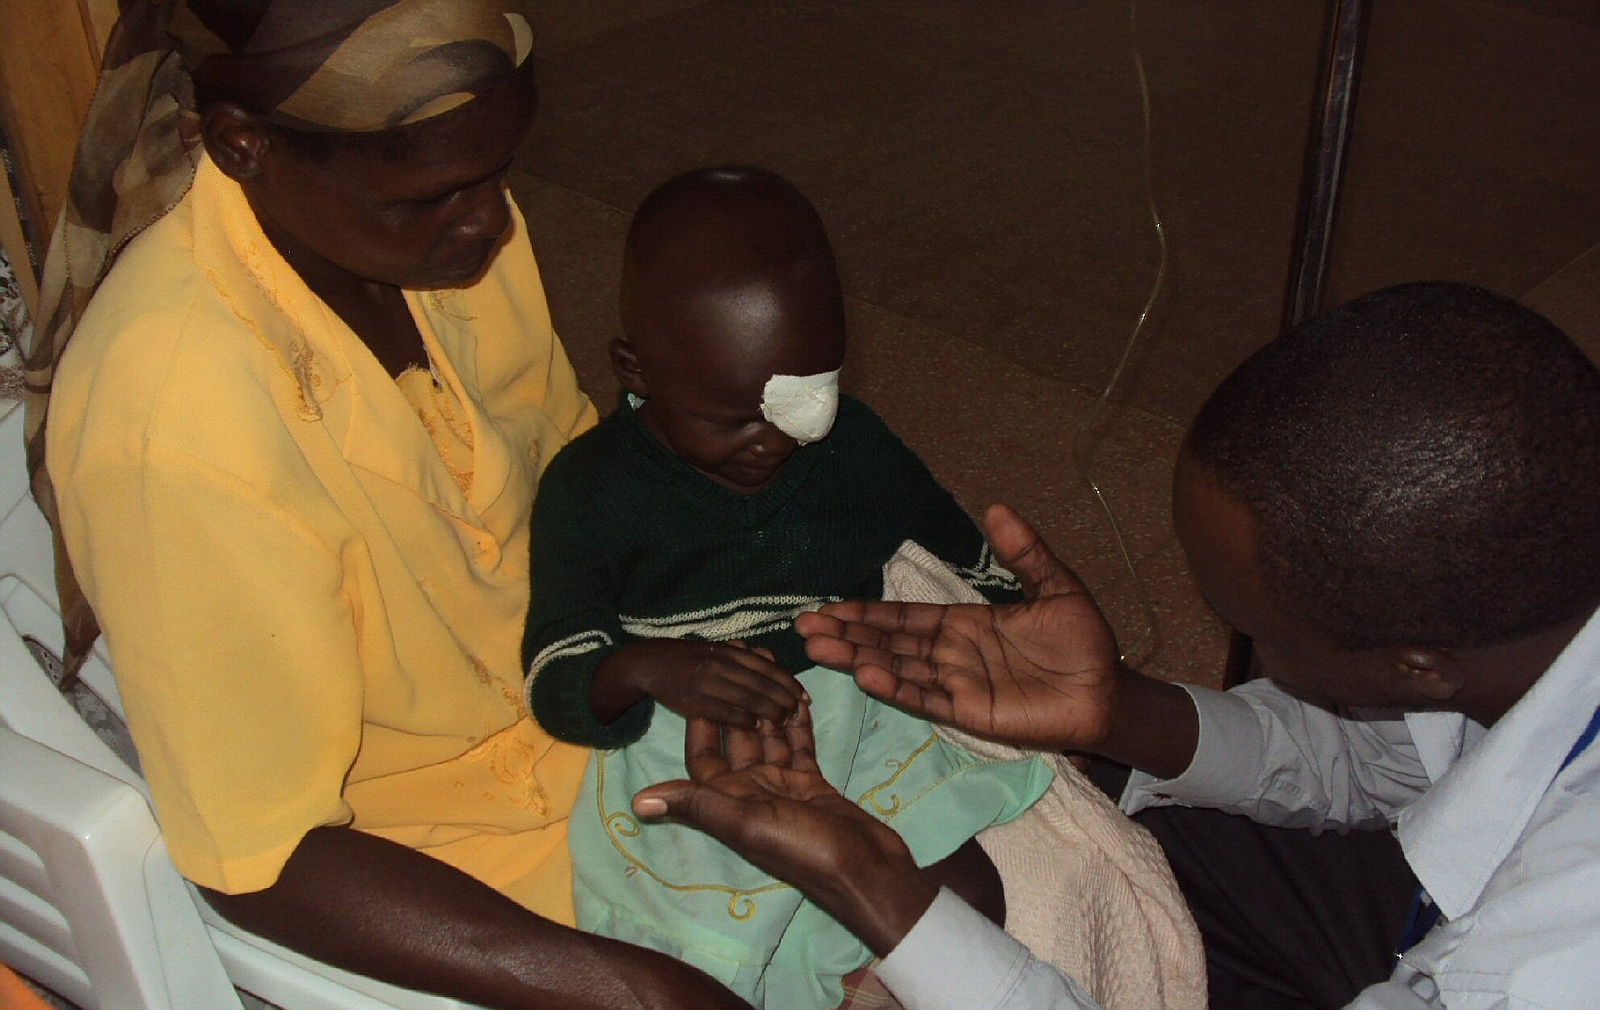 A young girl with a bandage over her eye sits on her mother's lap. A medical profesisonal holds out his hands to her, allowing her to make the first physical contact before a medical procedure.